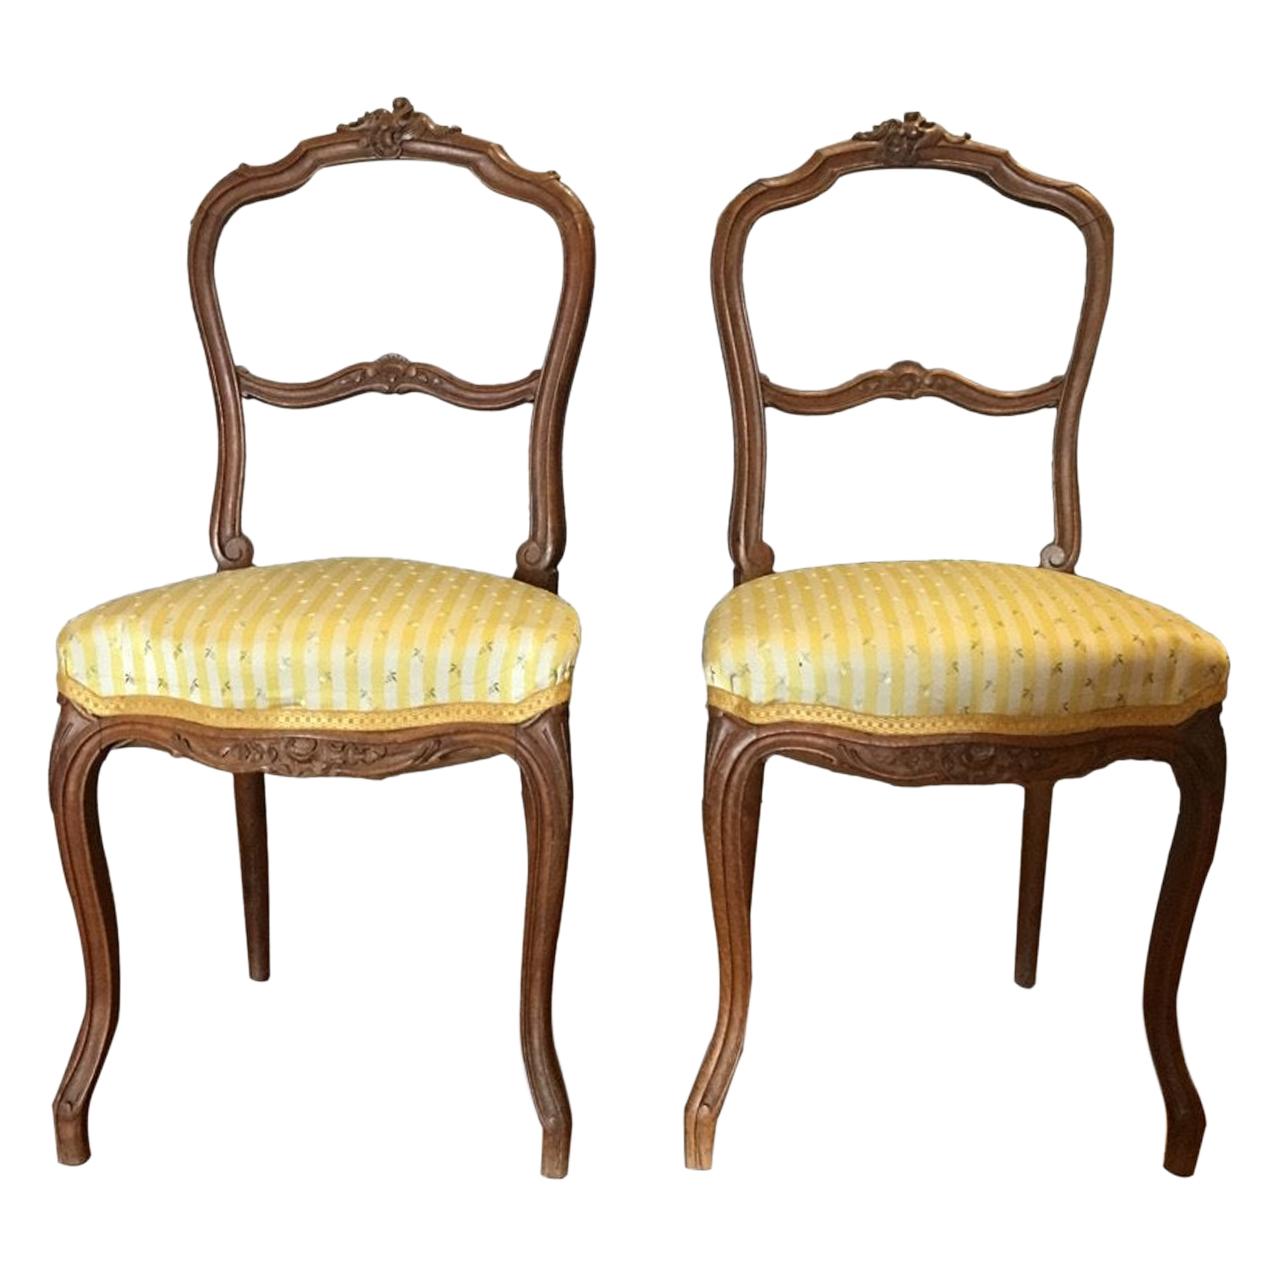 Pair of 19th Century Louis XVI French Side Chairs, Carved Oak Wood, circa 1840